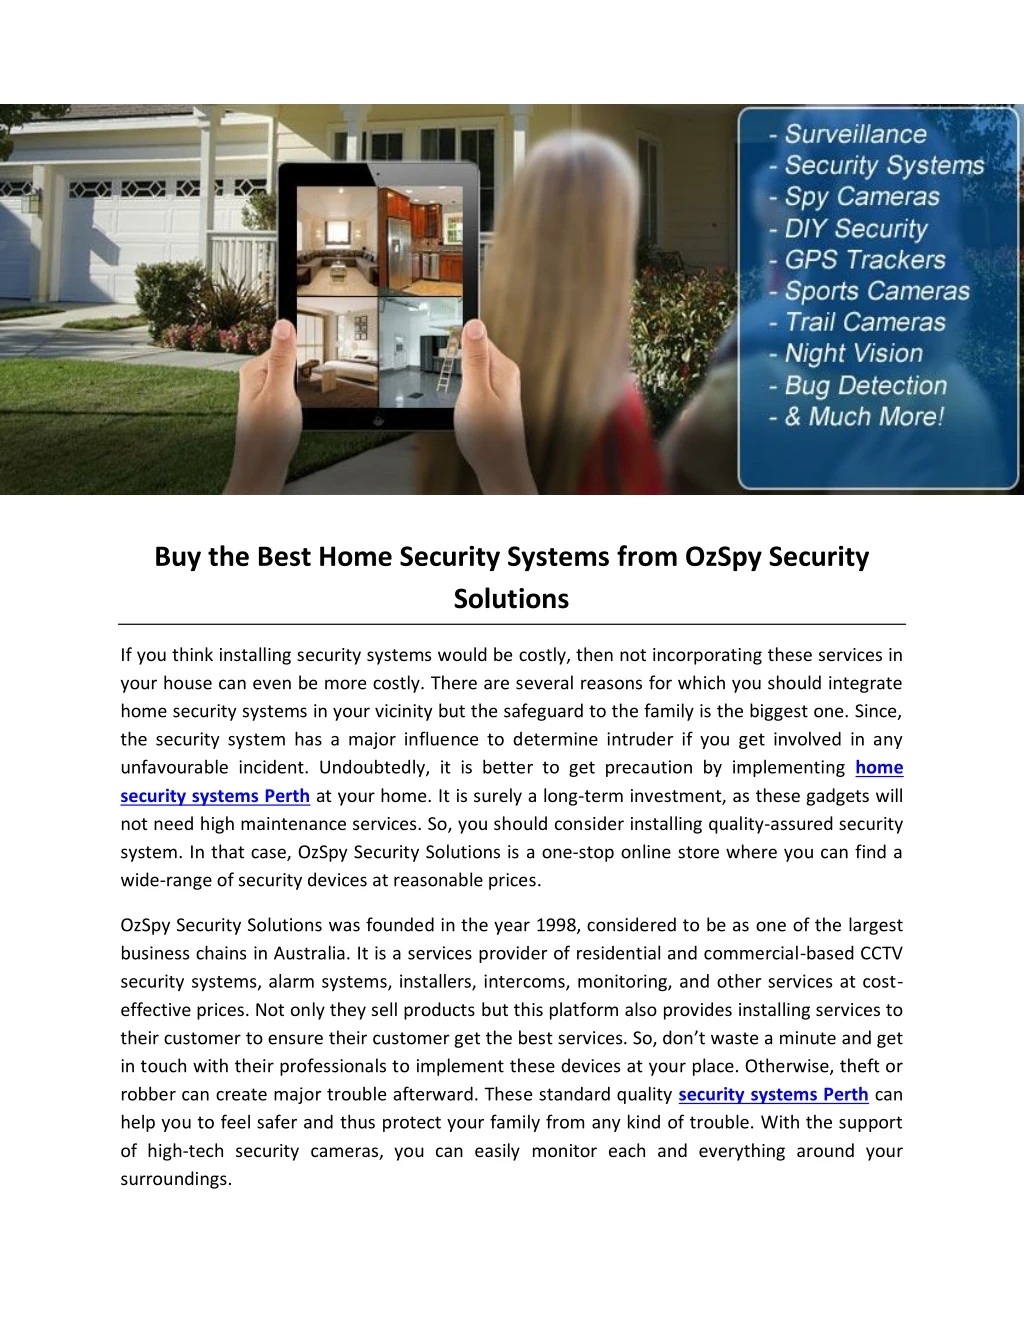 buy the best home security systems from ozspy